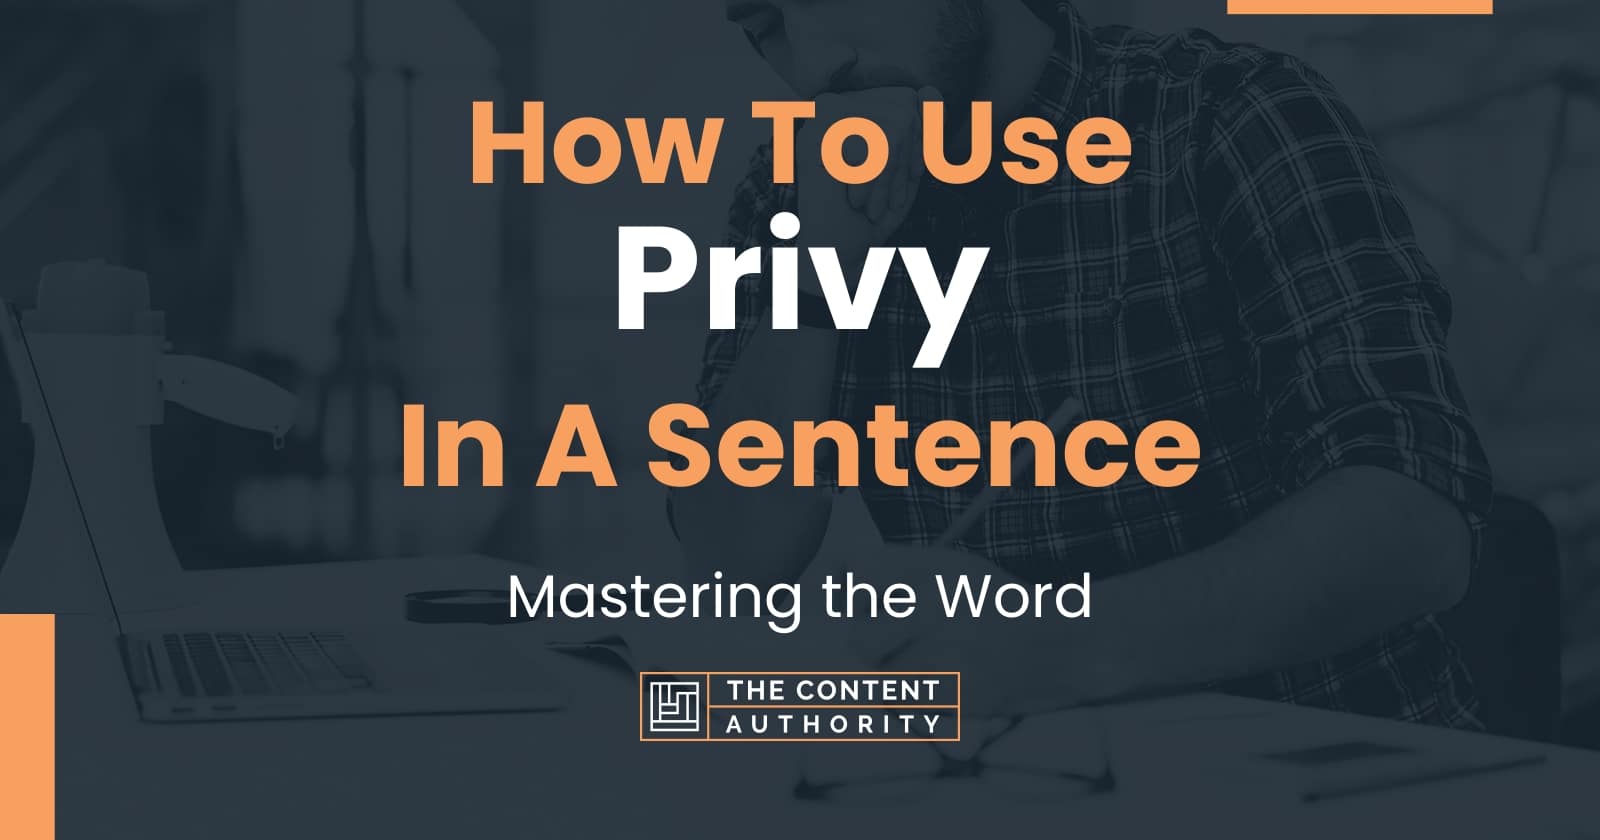 how to use privy in a sentence